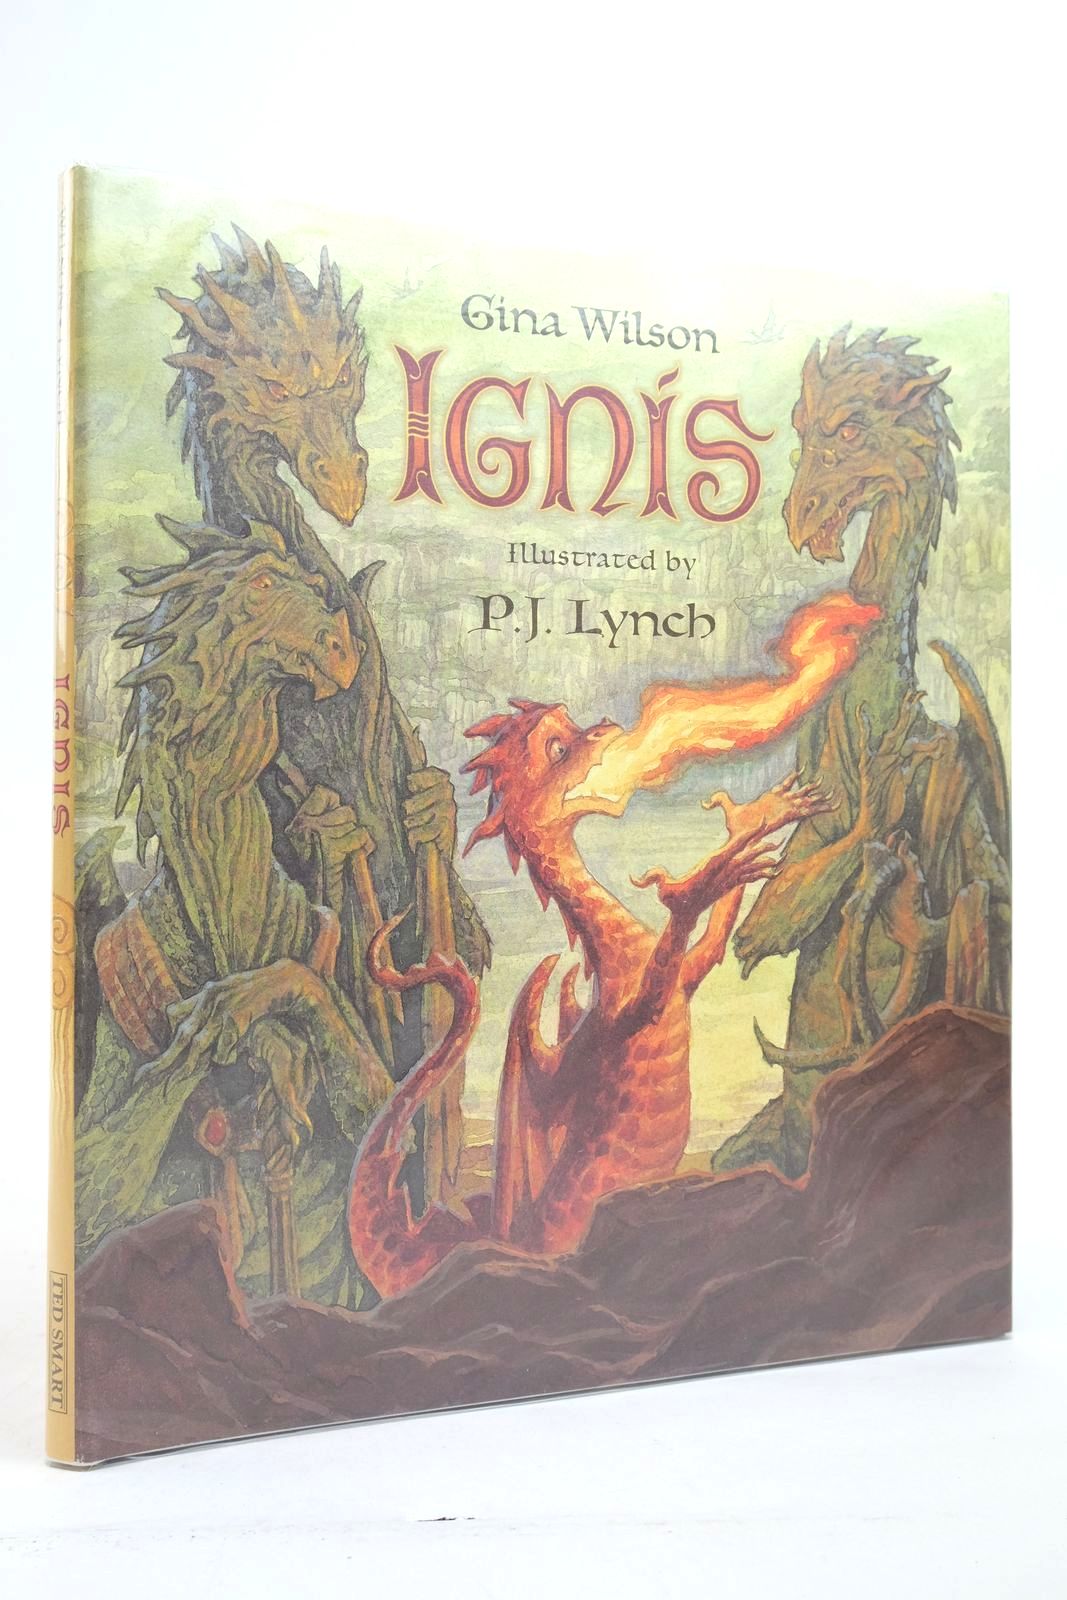 Photo of IGNIS written by Wilson, Gina illustrated by Lynch, P.J. published by Ted Smart (STOCK CODE: 2139251)  for sale by Stella & Rose's Books